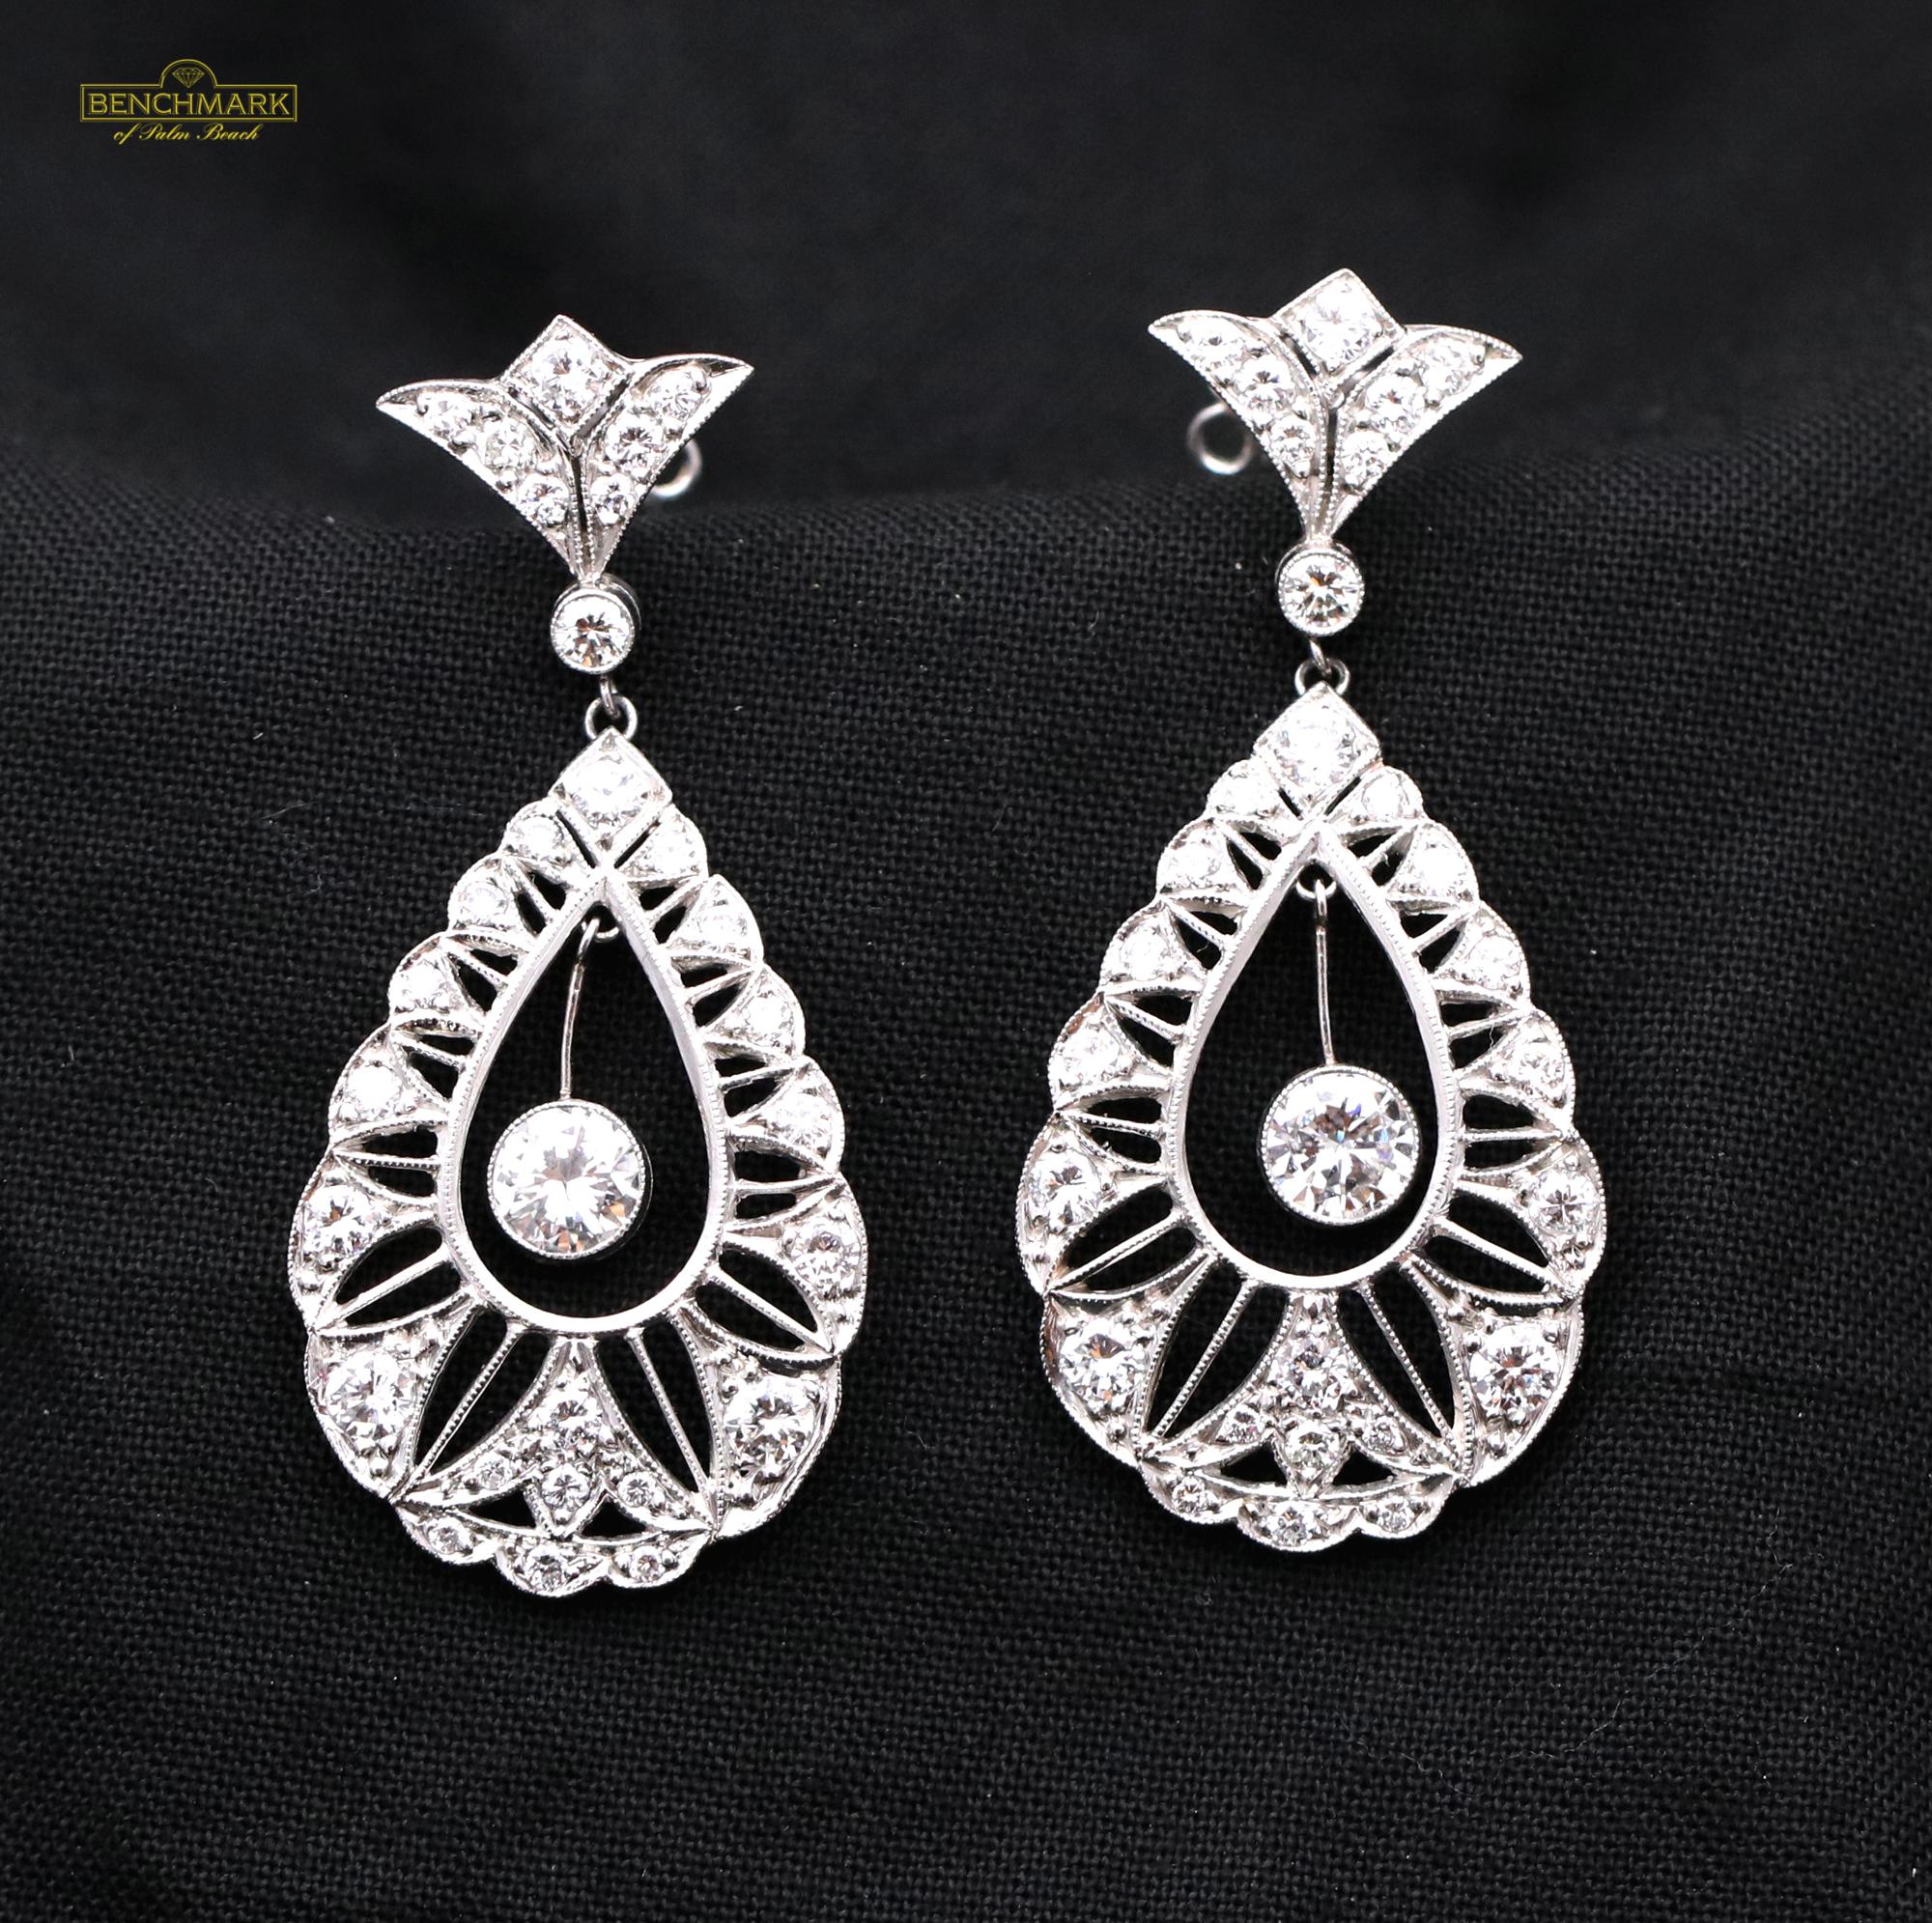 A pair of platinum antique reproduction earrings, in the Belle Epoque style centered around a bezel set round brilliant cut diamond weighing approximately 0.66ct. The center stone is suspended in the center of the earring via a platinum bar, it is